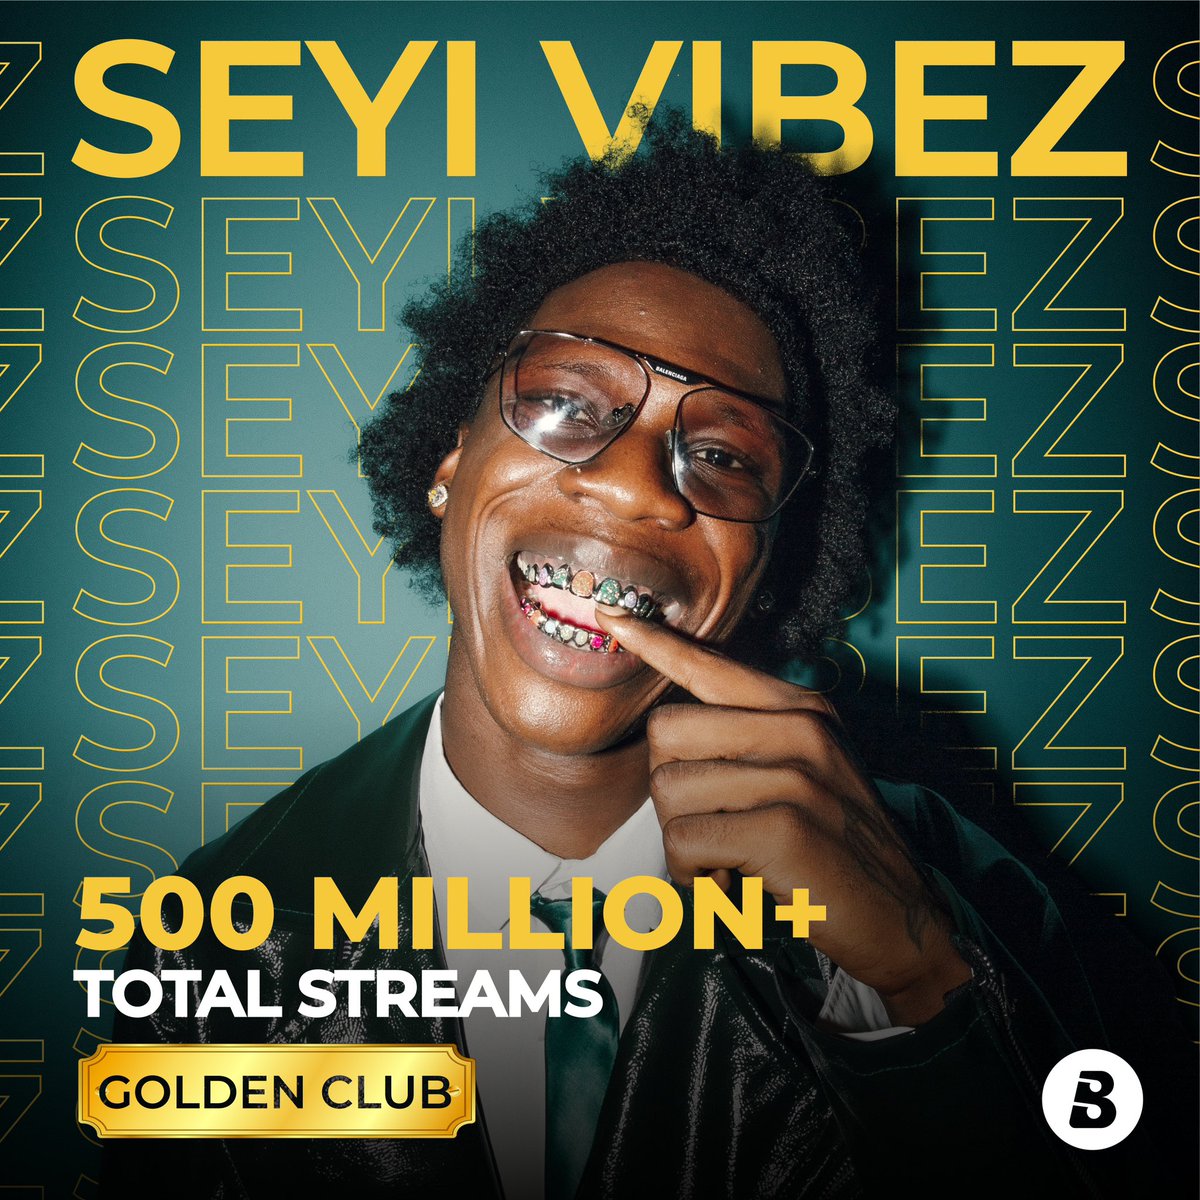 Loseyi Supremacy @seyi_vibez! 🚀 We say big congratulations to this certified hitmaker as he hits half a billion streams on Boomplay!🔥⚡️ You already know, No Seyi No Vibez, so run up this special playlist on Boomplay! ➡️ Boom.lnk.to/SeyiVibezFocus #SeyiVibez500mBoomplayStreams